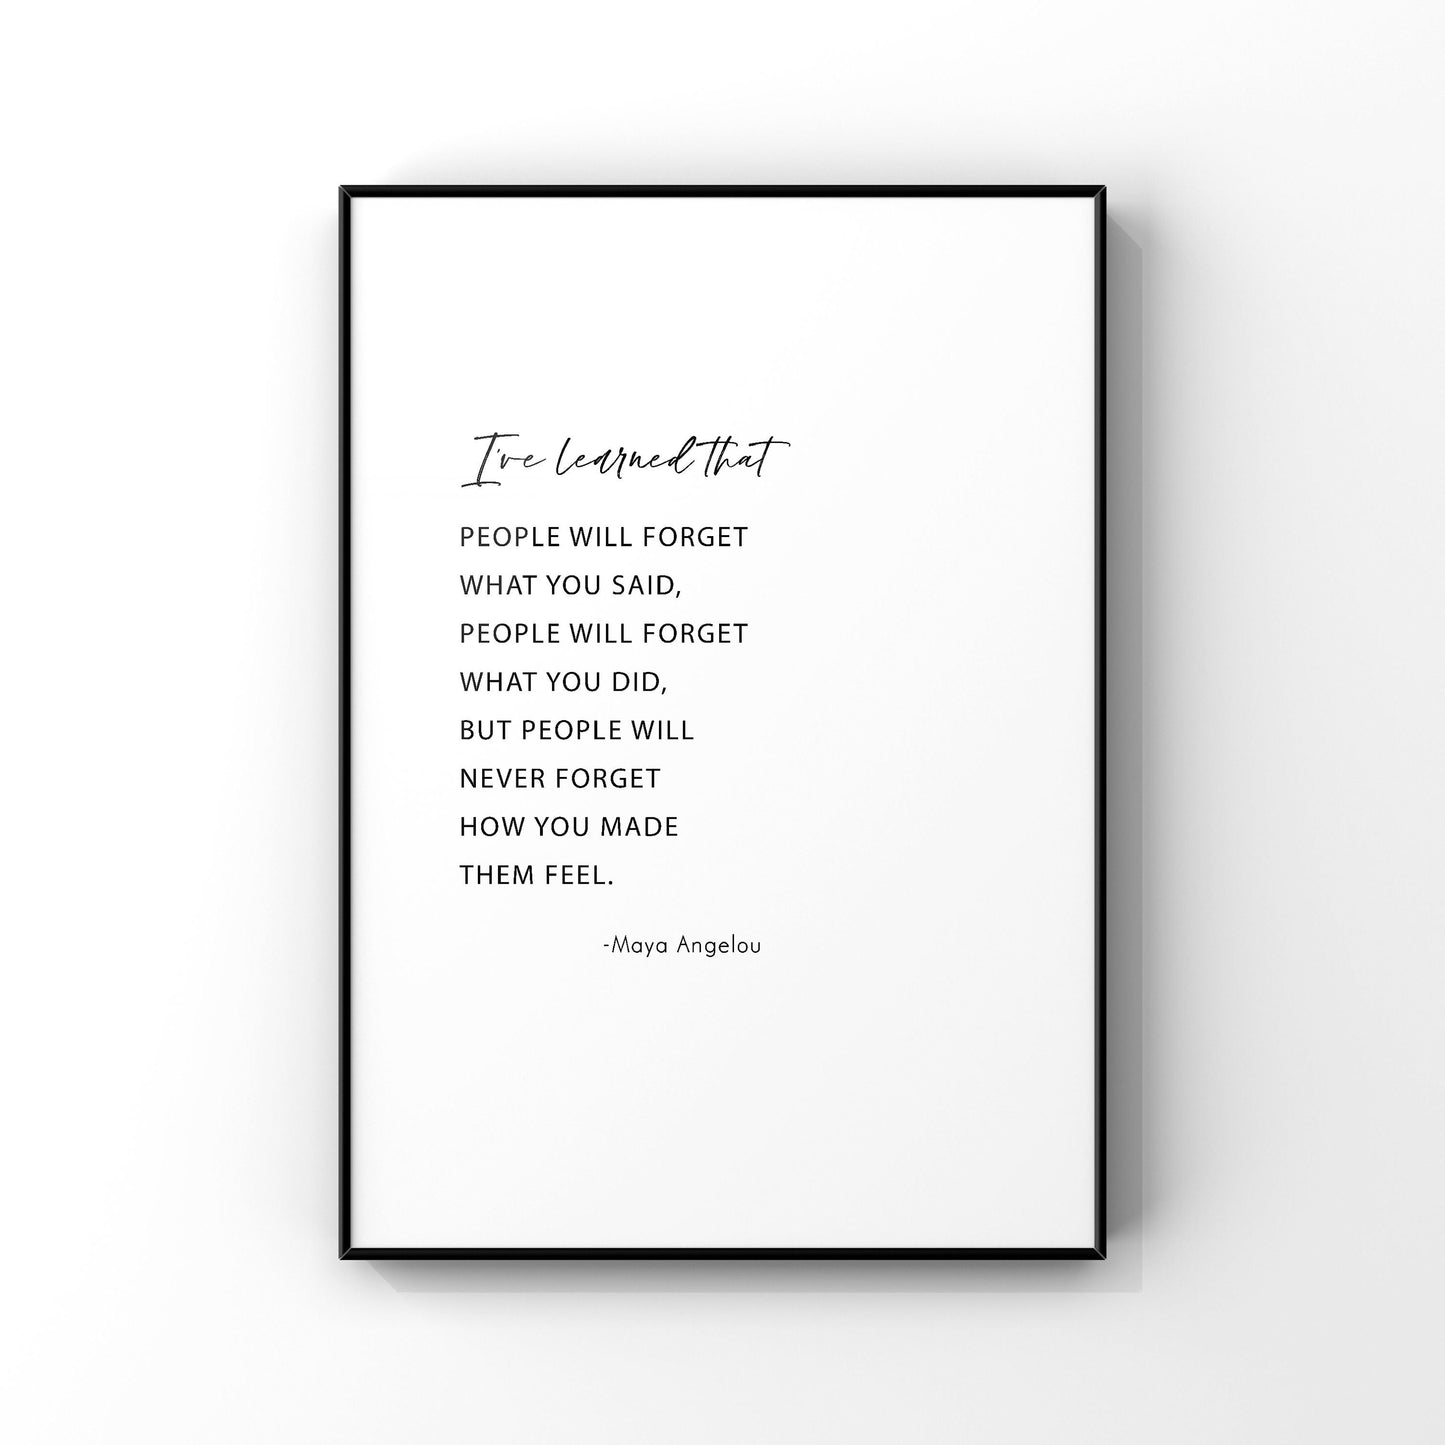 I’ve learned that people will forget,Maya Angelou quotes,Maya Angelou Wall Art,Inspirational print,Wall decor,Maya Angelou poster,Motivation